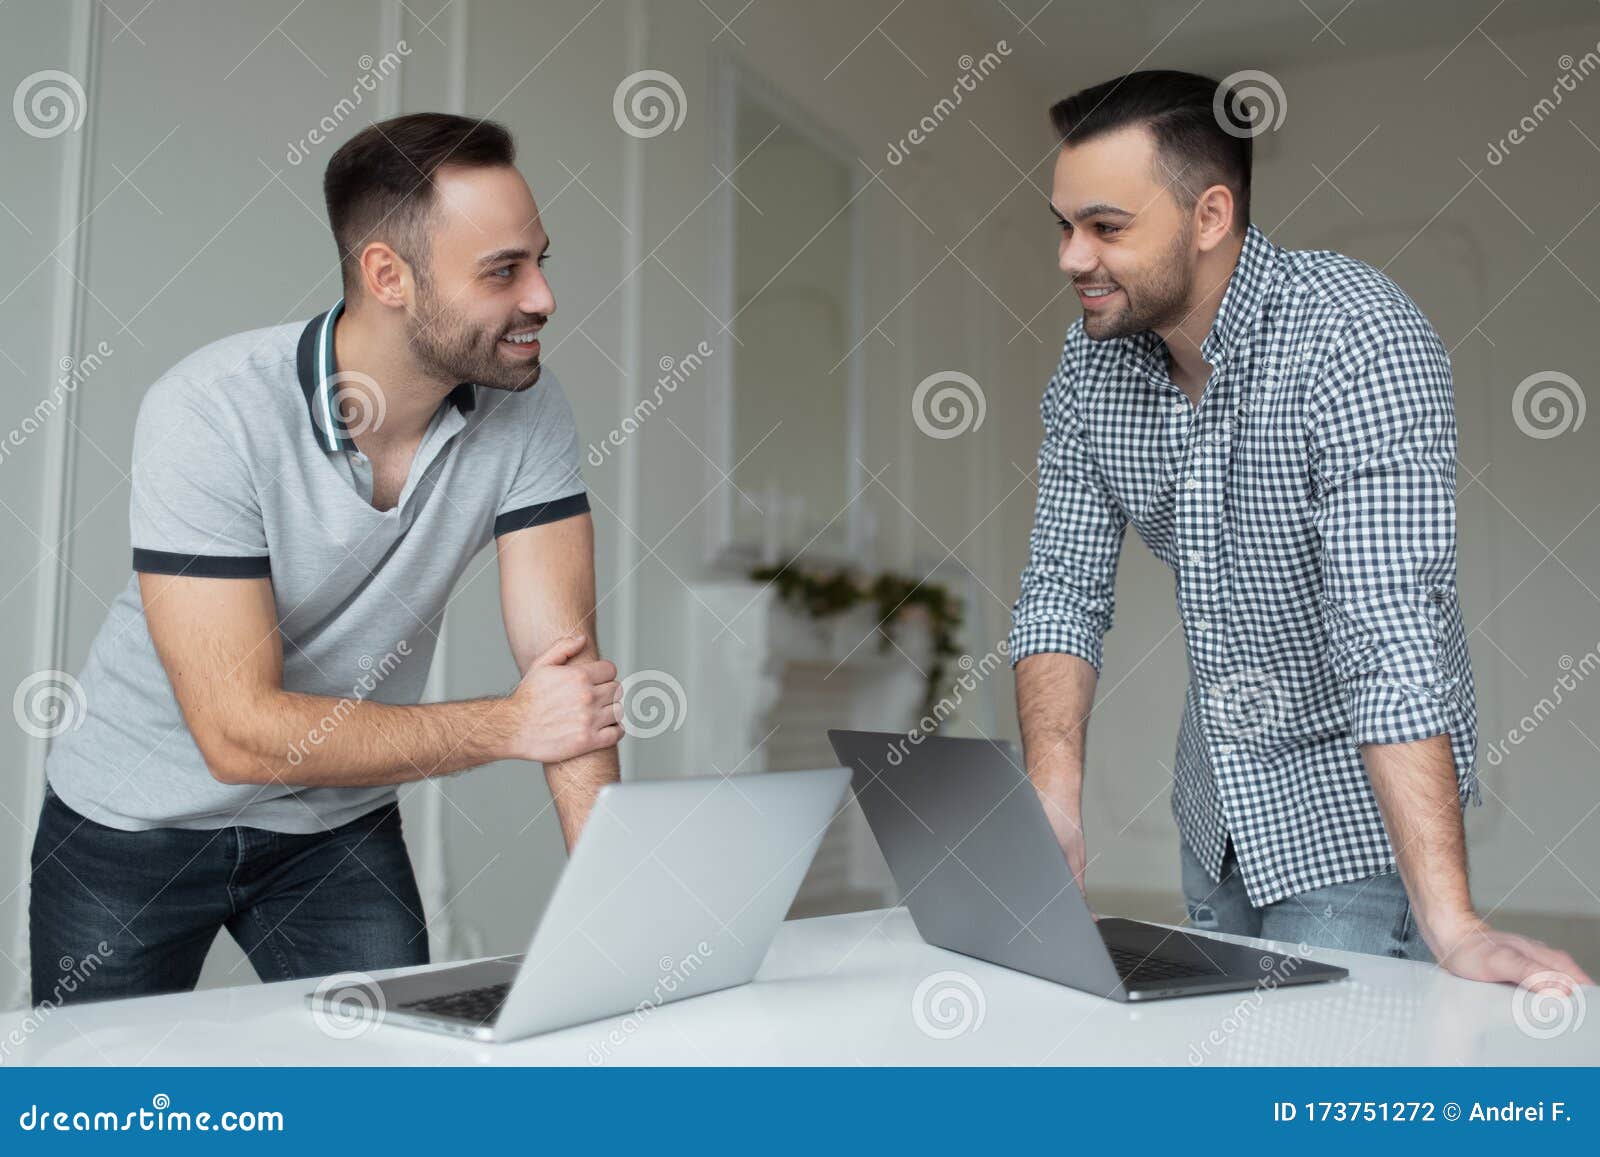 portrait-two-self-confident-businessman-working-laptop-one-men-talking-smartphone-another-guy-pointing-finger-173751272.jpg